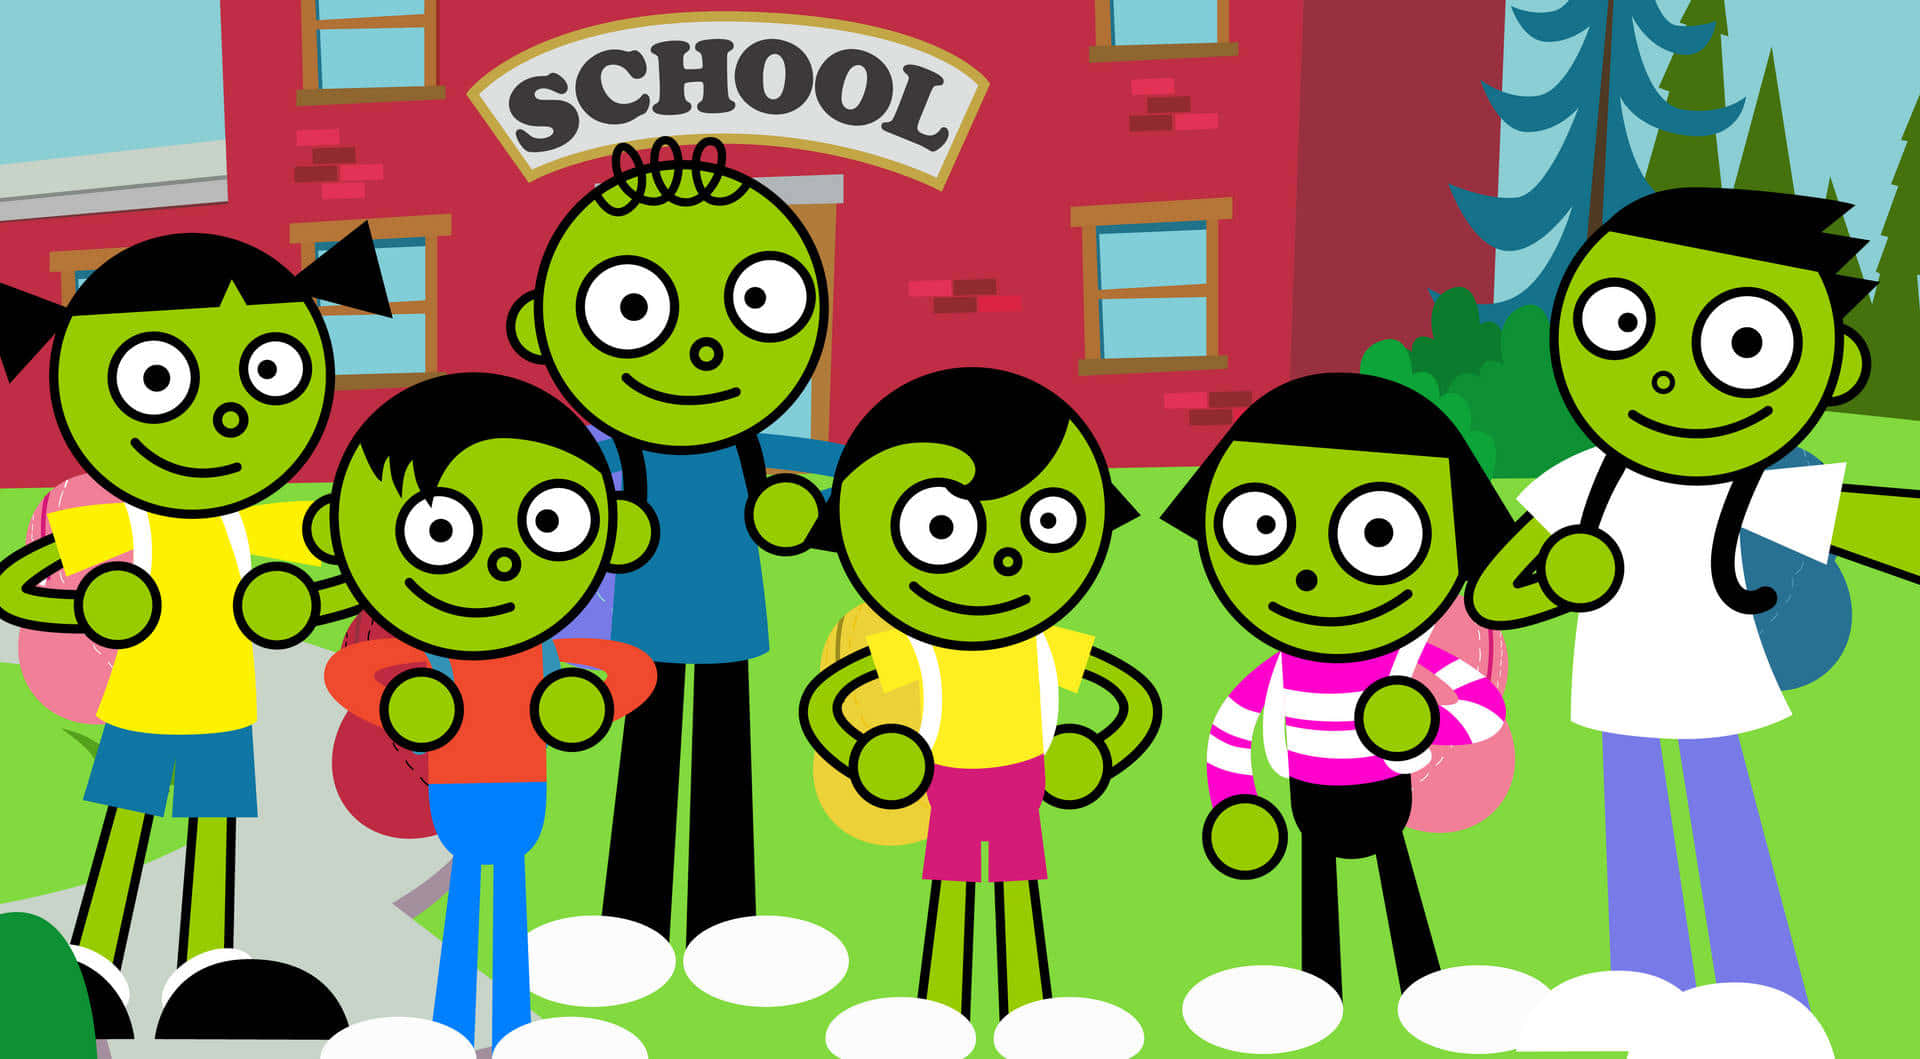 Pbs Kids Pictures